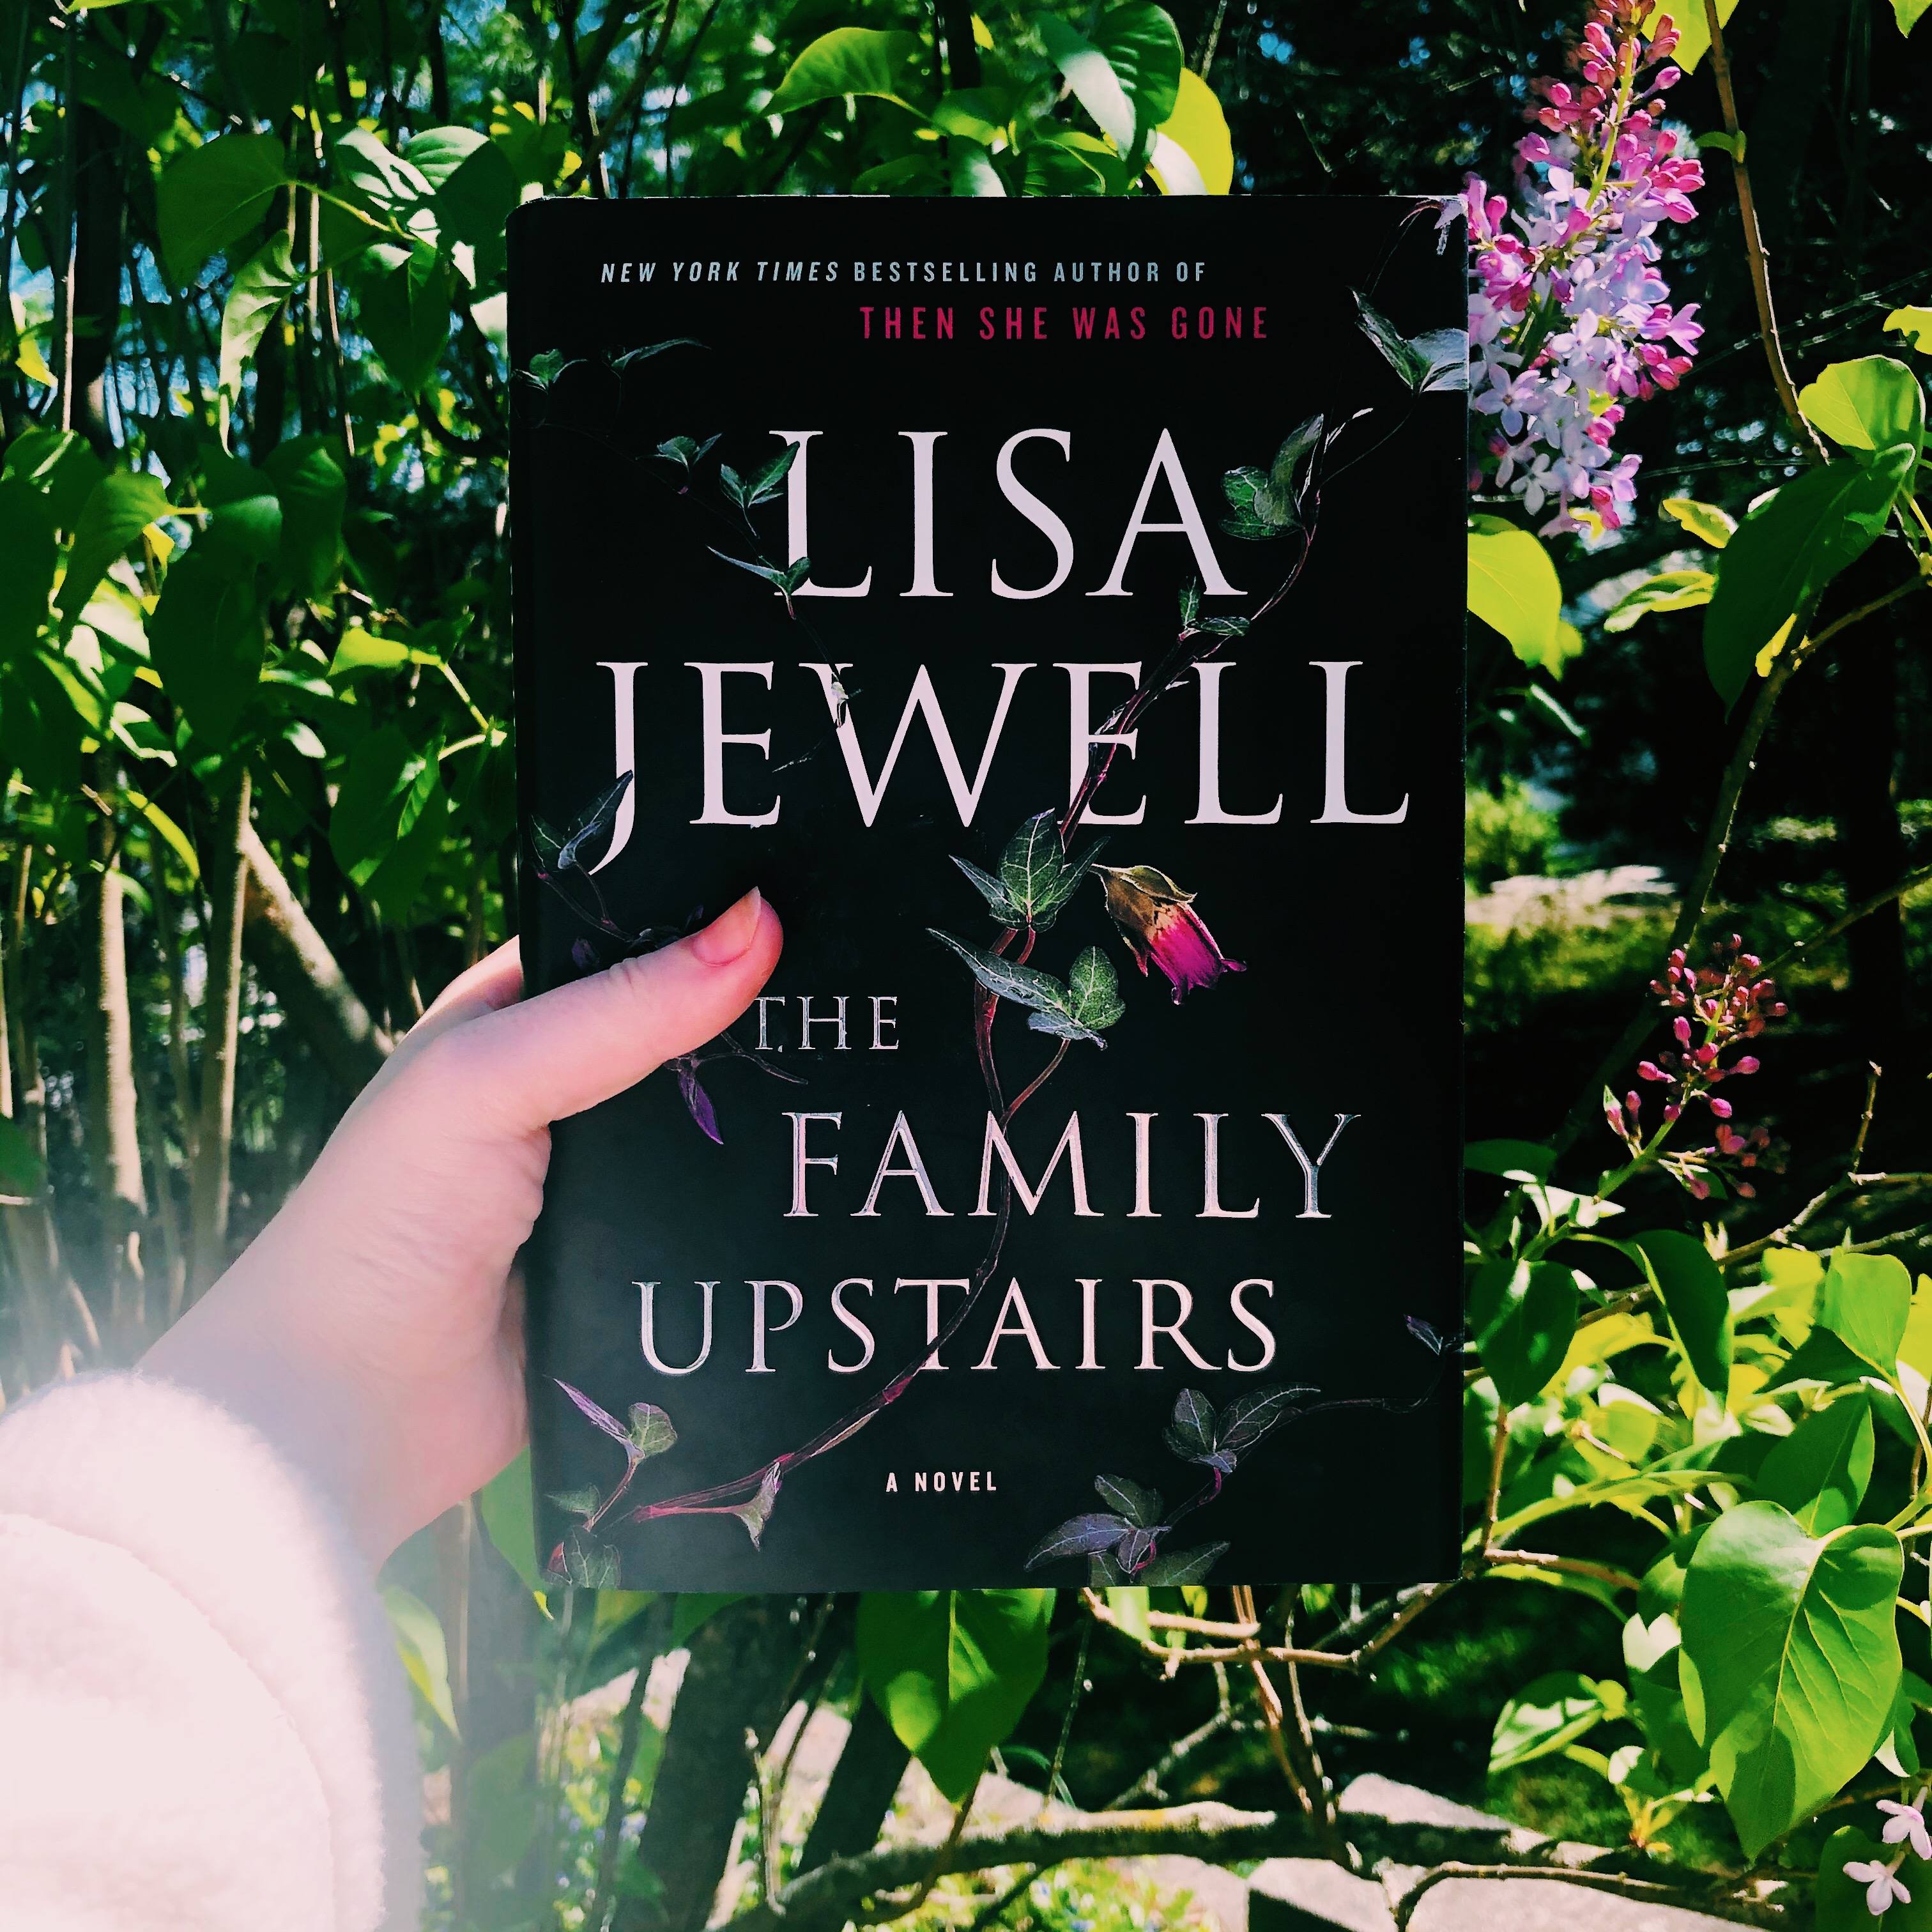 synopsis of i found you lisa jewell